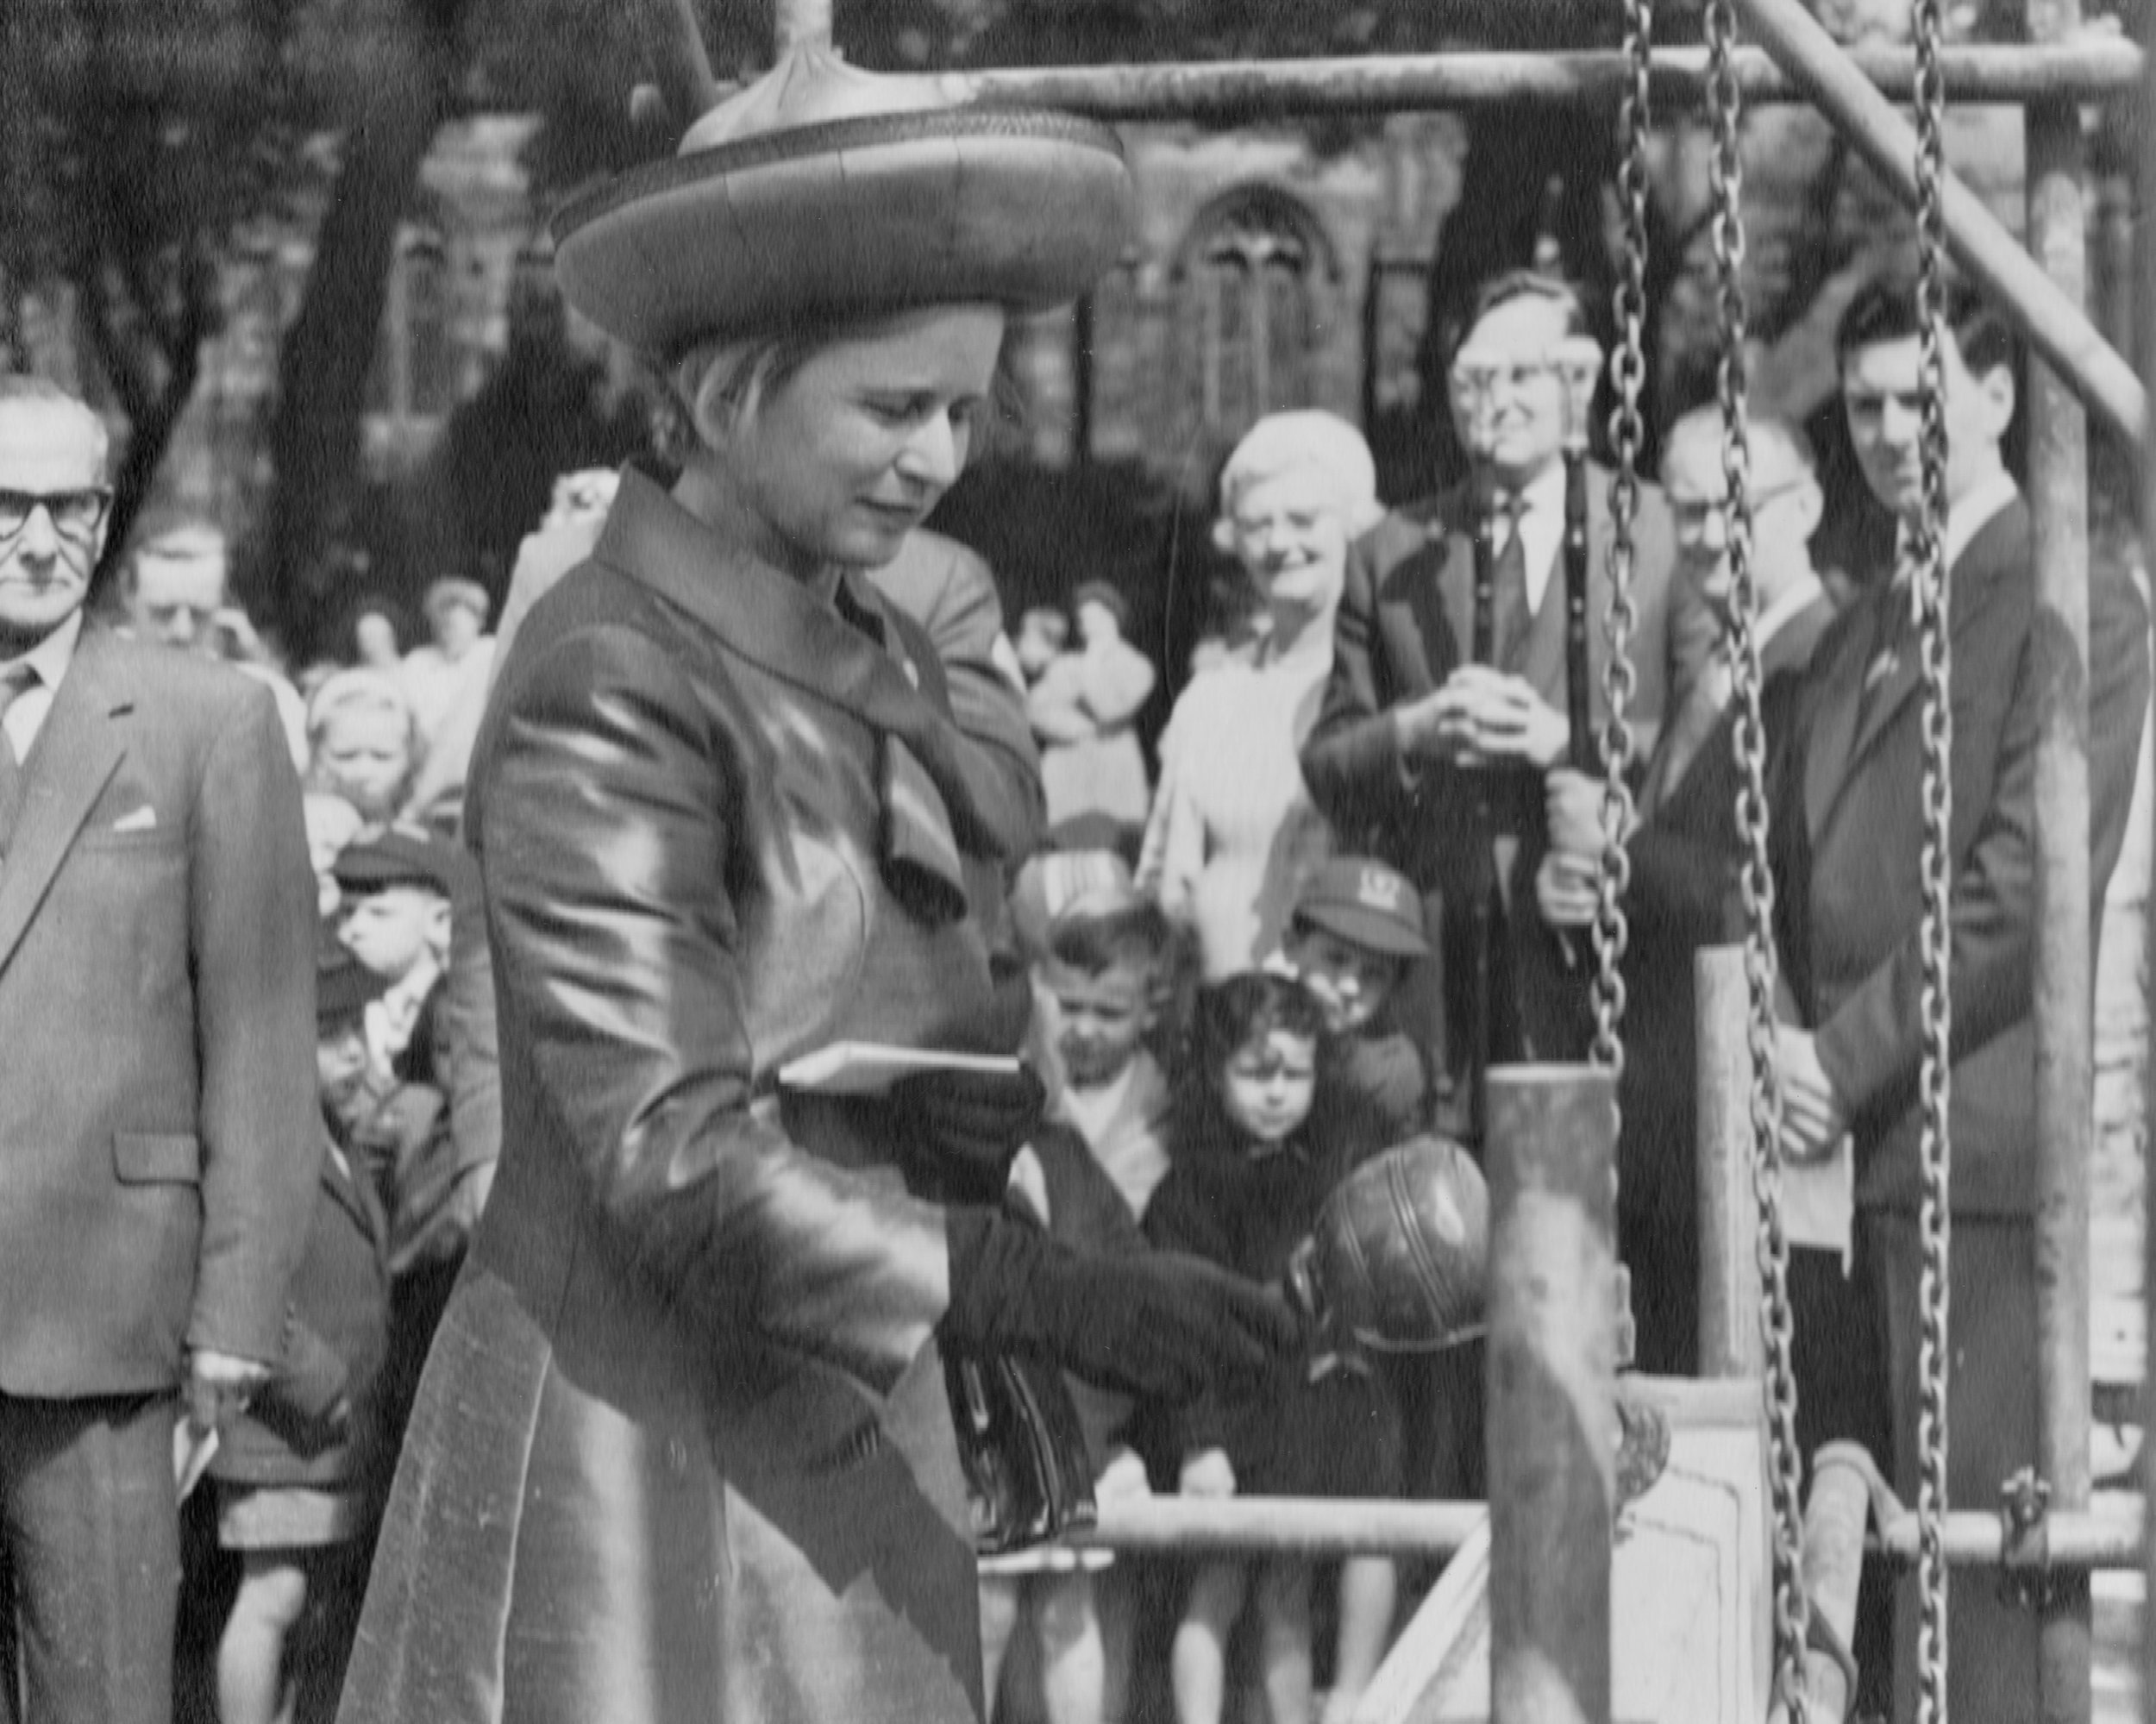 Councillor Kathleen Ollerenshaw M.A. D.Phil, laying the foundation stone of the new All Saints', Newton Heath Primary School, on Saint James' Day 1963.